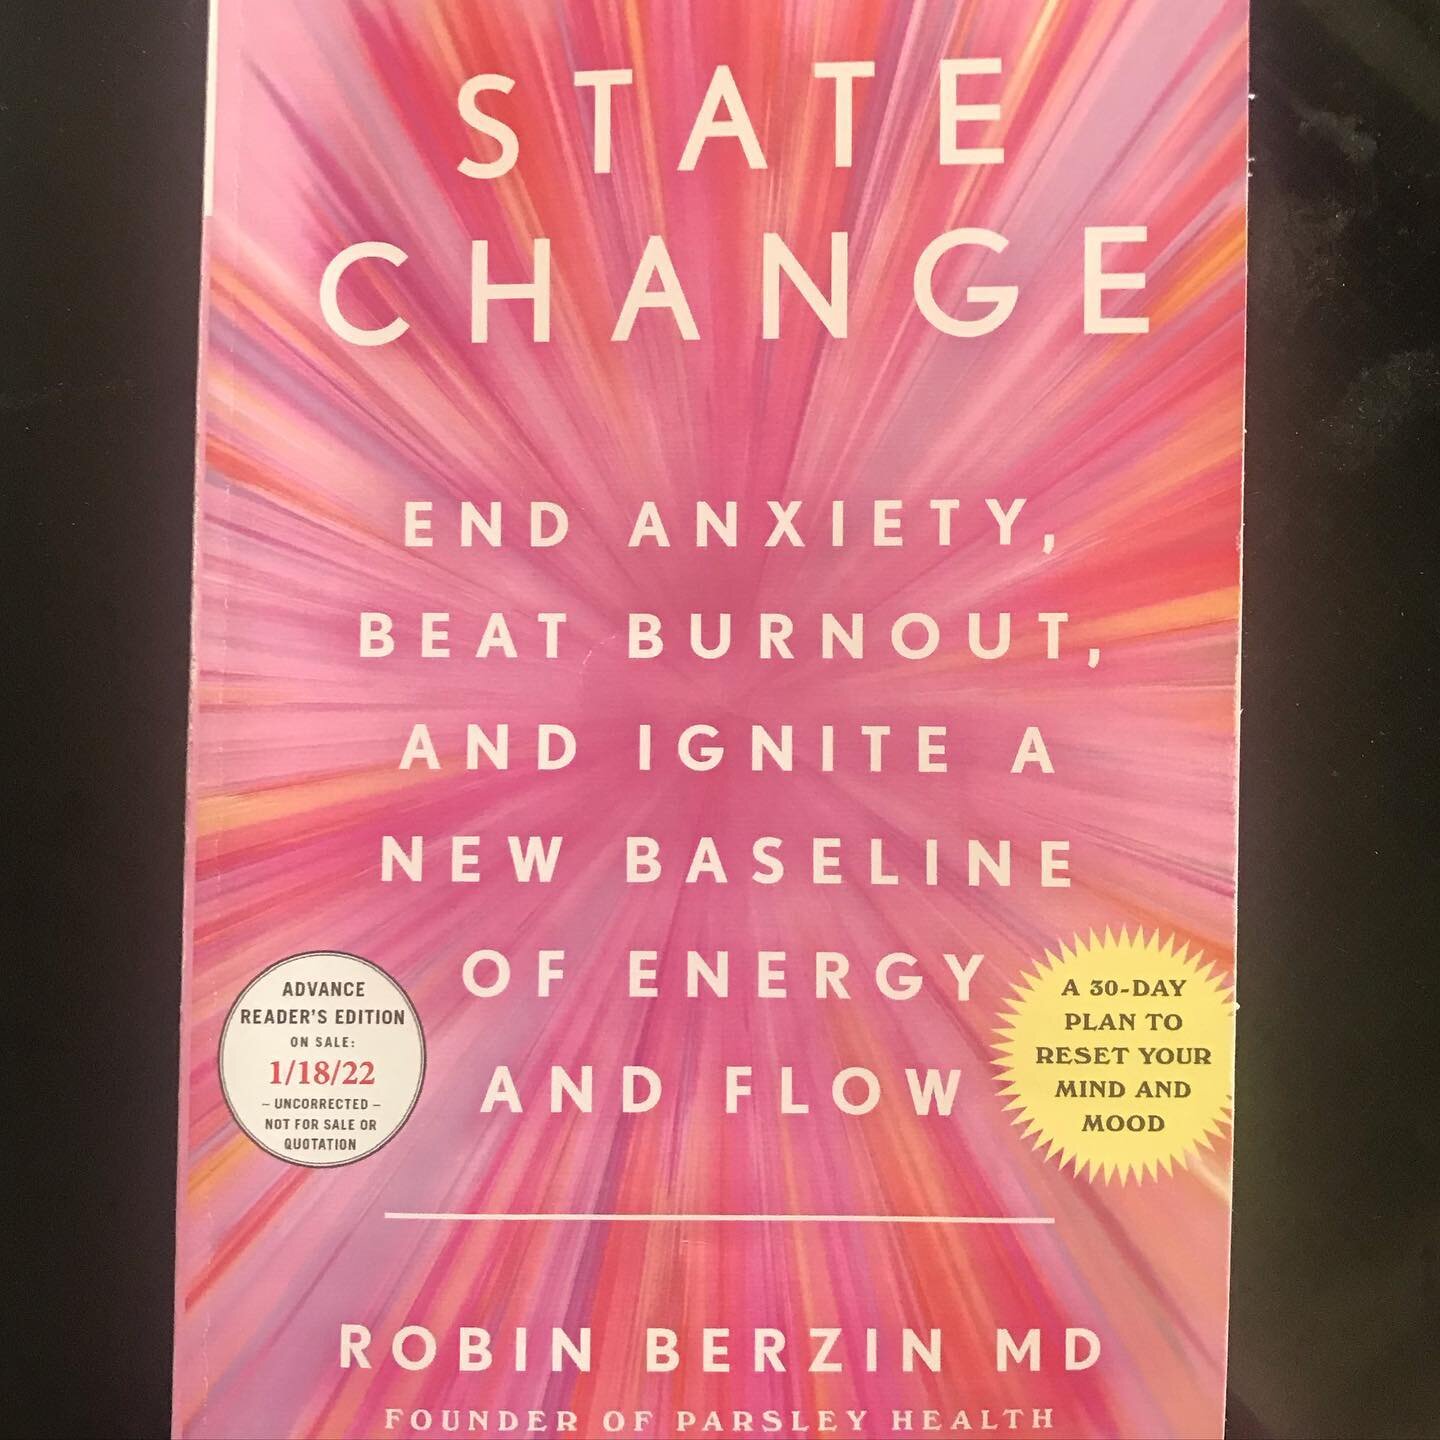 Just finished reading State Change, the new book by @robinberzinmd, founder of @parsleyhealth.

Feeling anxious, tired, burned out, sad, and unable to focus is so pervasive in our society nowadays.

Dr. Berzin points out that these days we consume mo